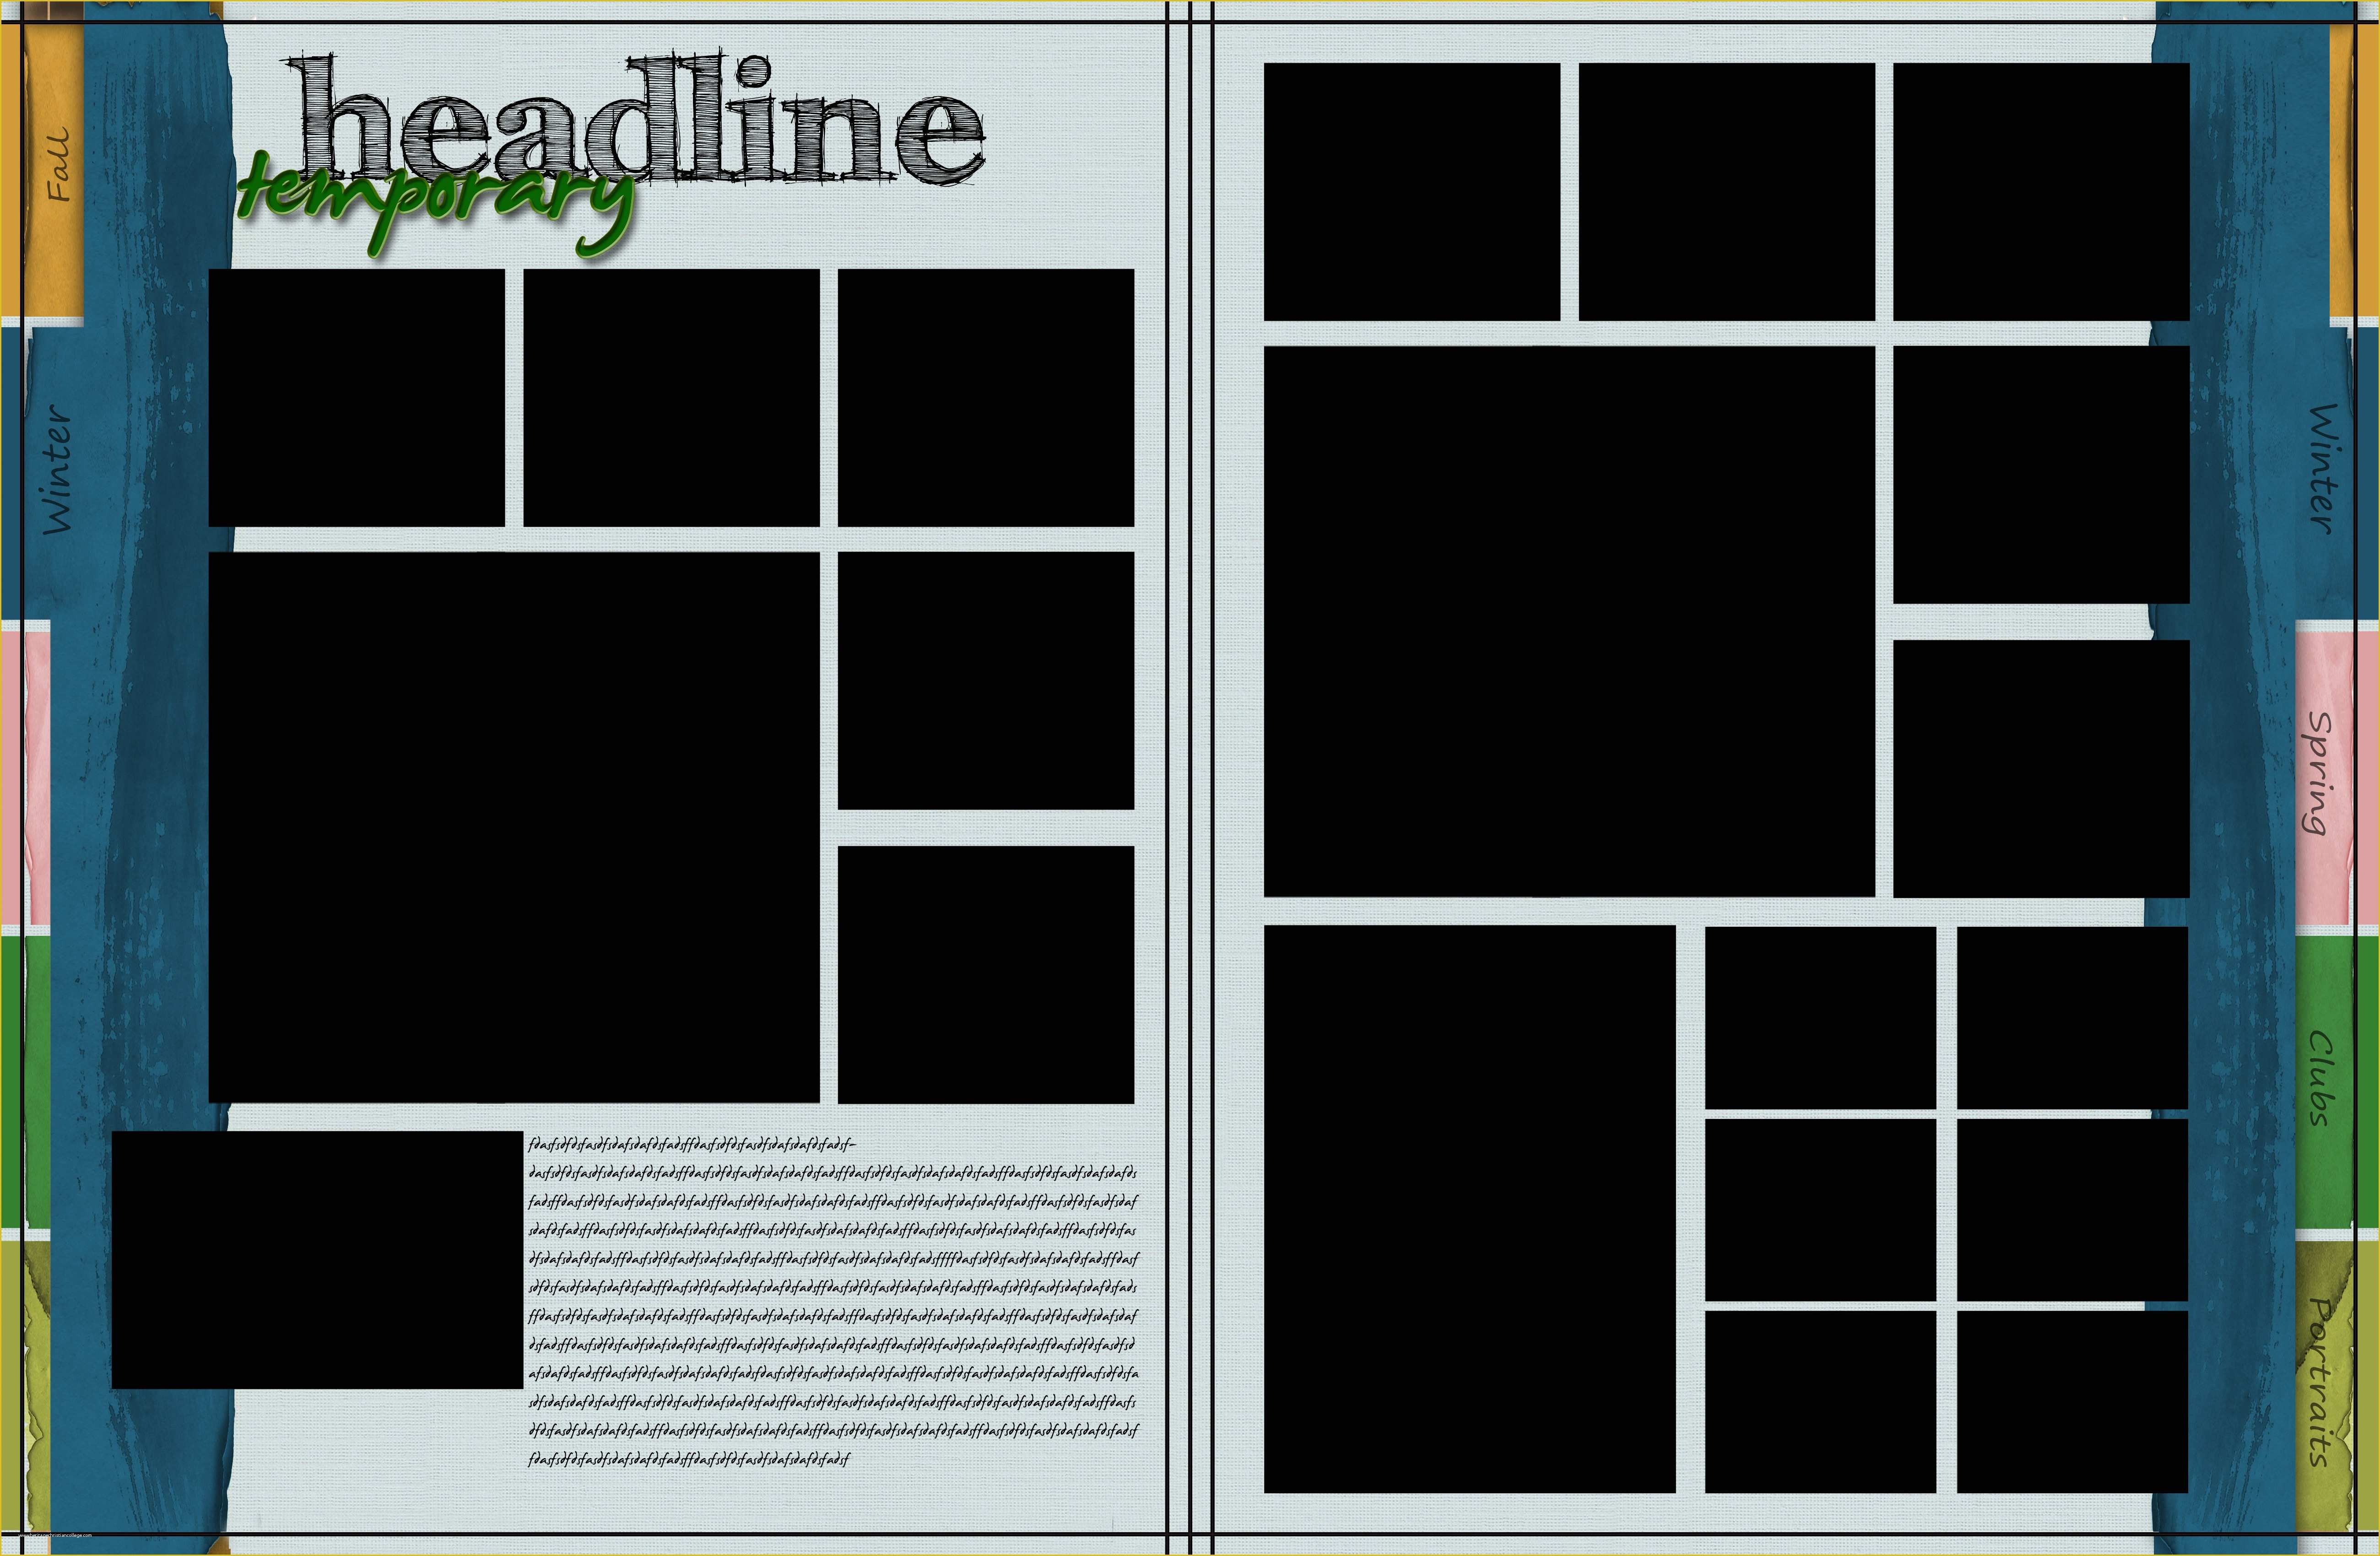 Free Indesign Yearbook Template Download Of Scrapsimple Digital Layout